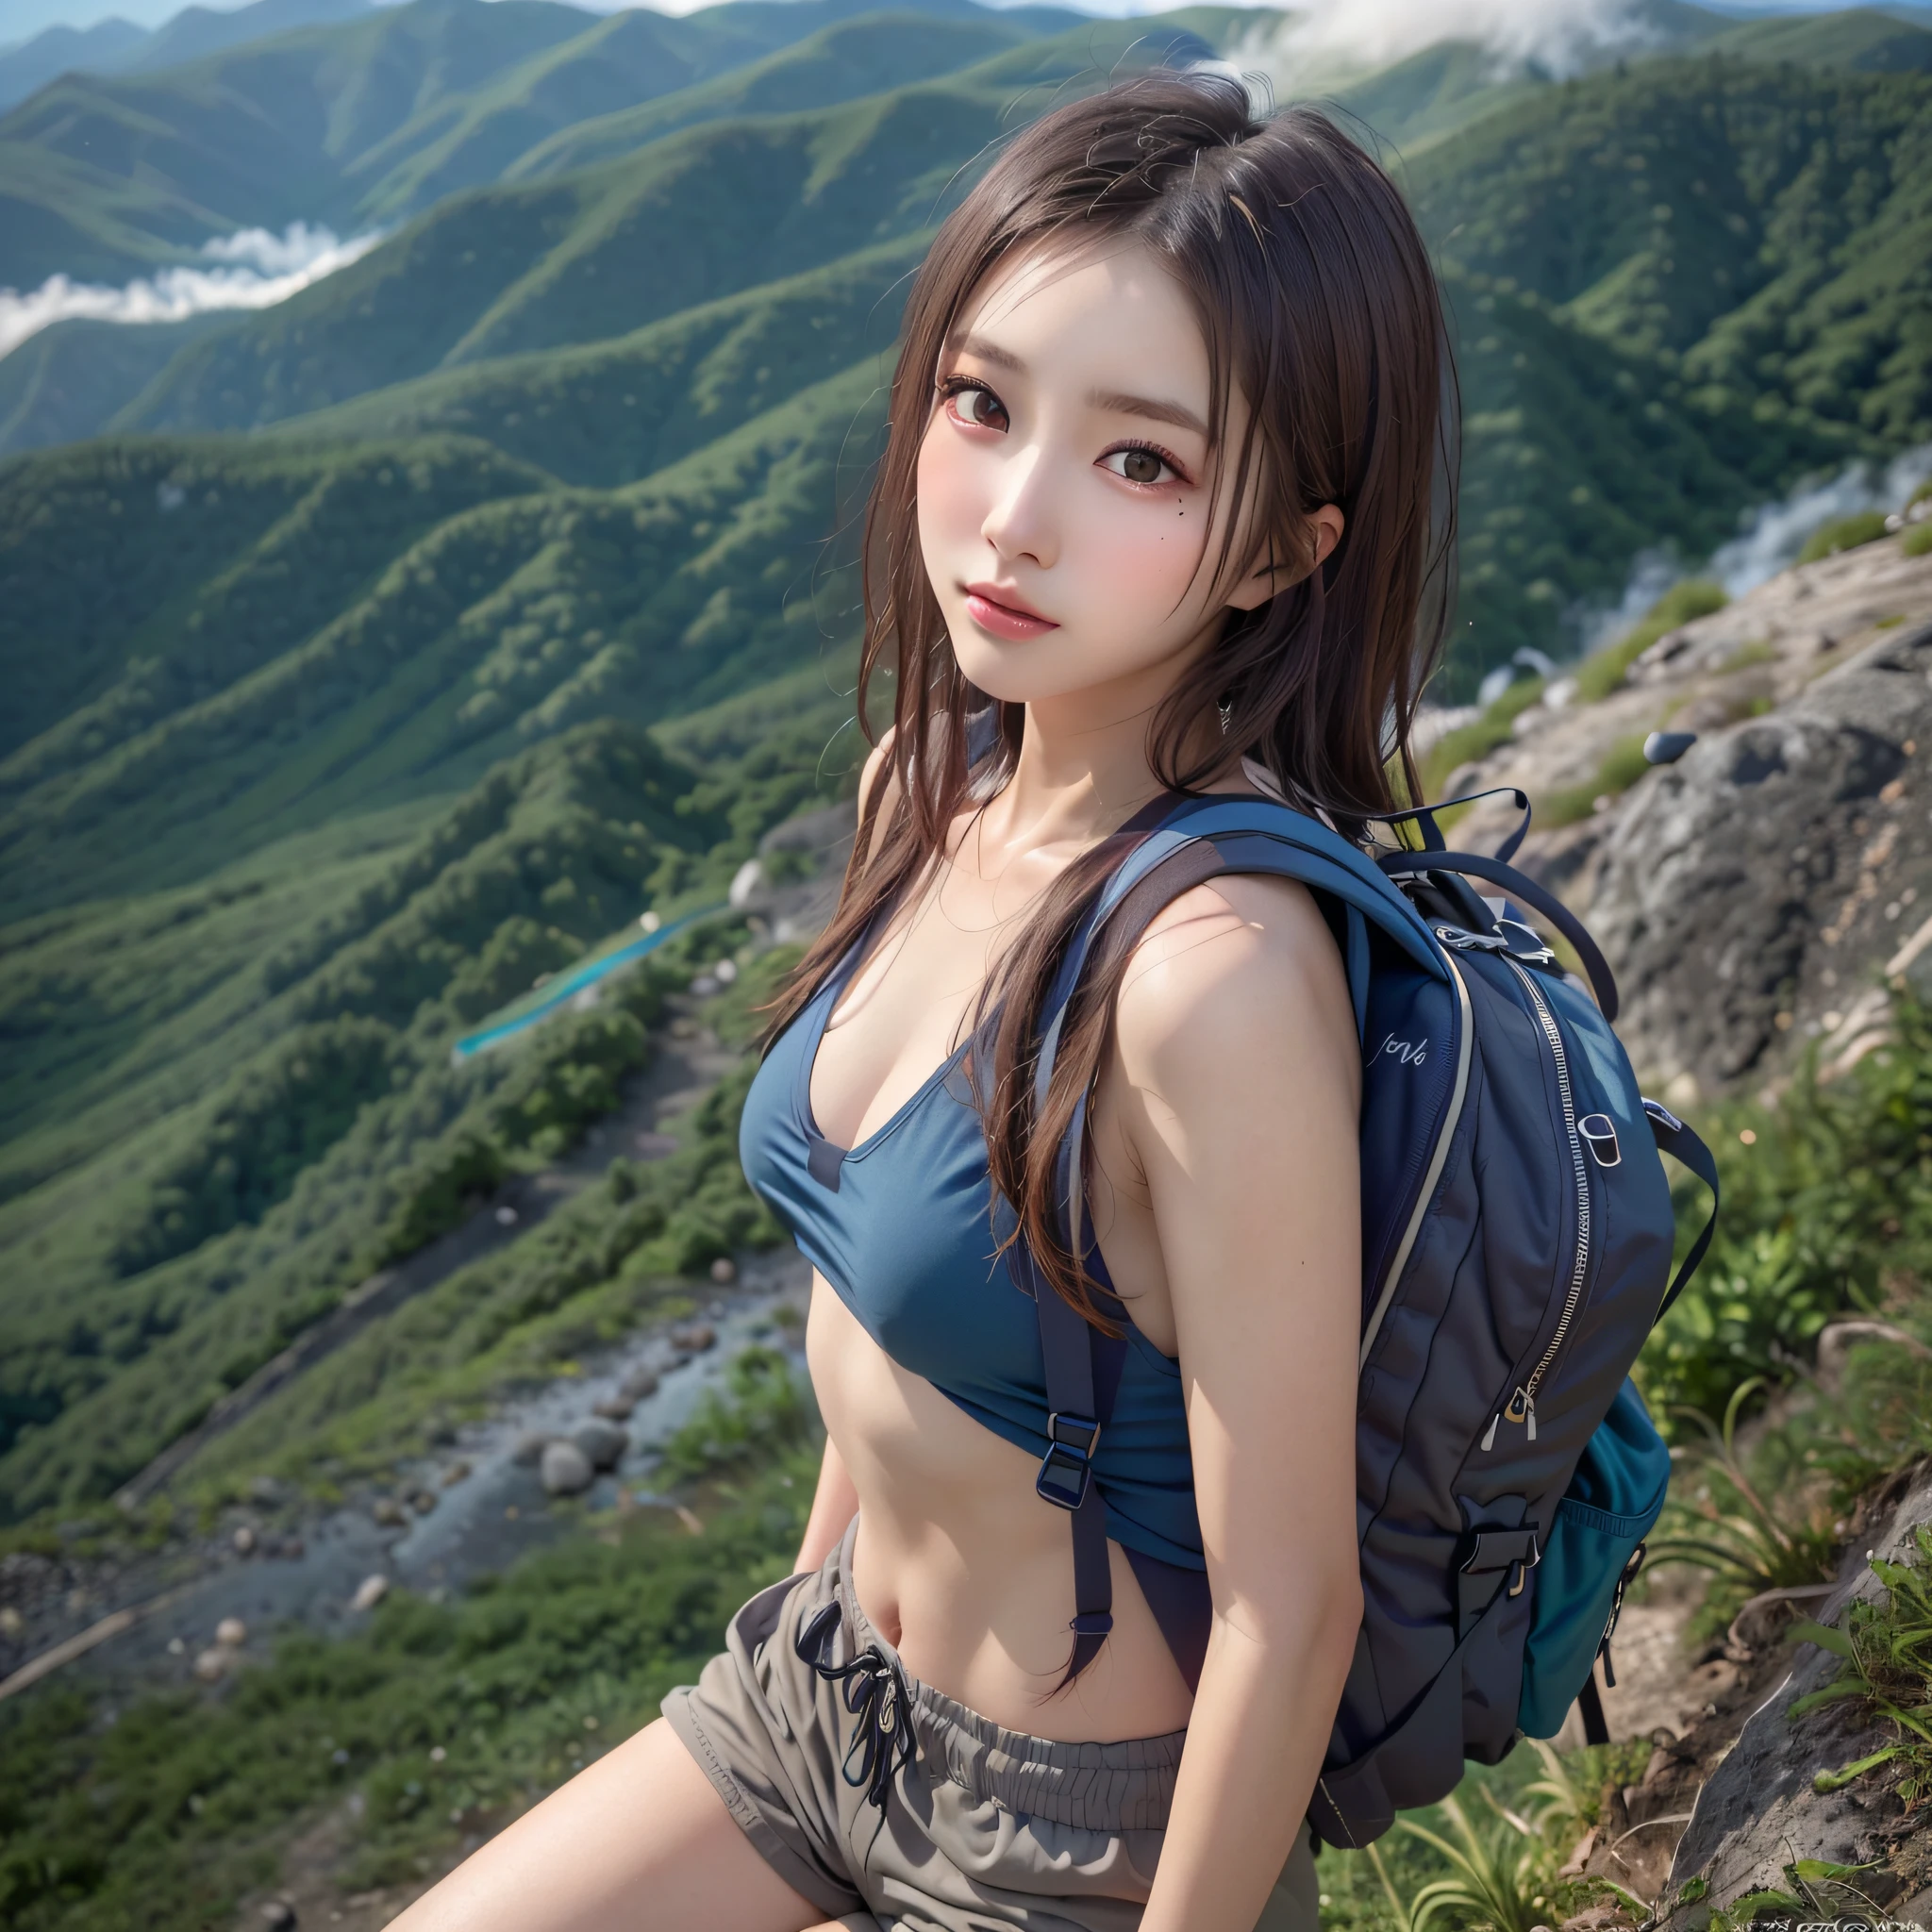 (Naturescape photography), (best quality), masterpiece:1.2, ultra high res, photorealistic:1.4, RAW photo, (Magnificent mountain, sea of clouds), (On a very high mountain peak), (sunset), (wideangle shot),  (Show cleavage:0.8),
(1girl), (Photo from the knee up:1.3), (18 years old), (happy:1.2), (shiny skin), (real skin), (semi-long hair, dark brown hair)
(Sleeveless tank top), (blue Trekking shorts), (Carrying a large backpack), 
(ultra detailed face), (ultra Beautiful fece), (ultra detailed eyes), (ultra detailed nose), (ultra detailed mouth), (ultra detailed arms), (ultra detailed body), pan focus, looking at the audience